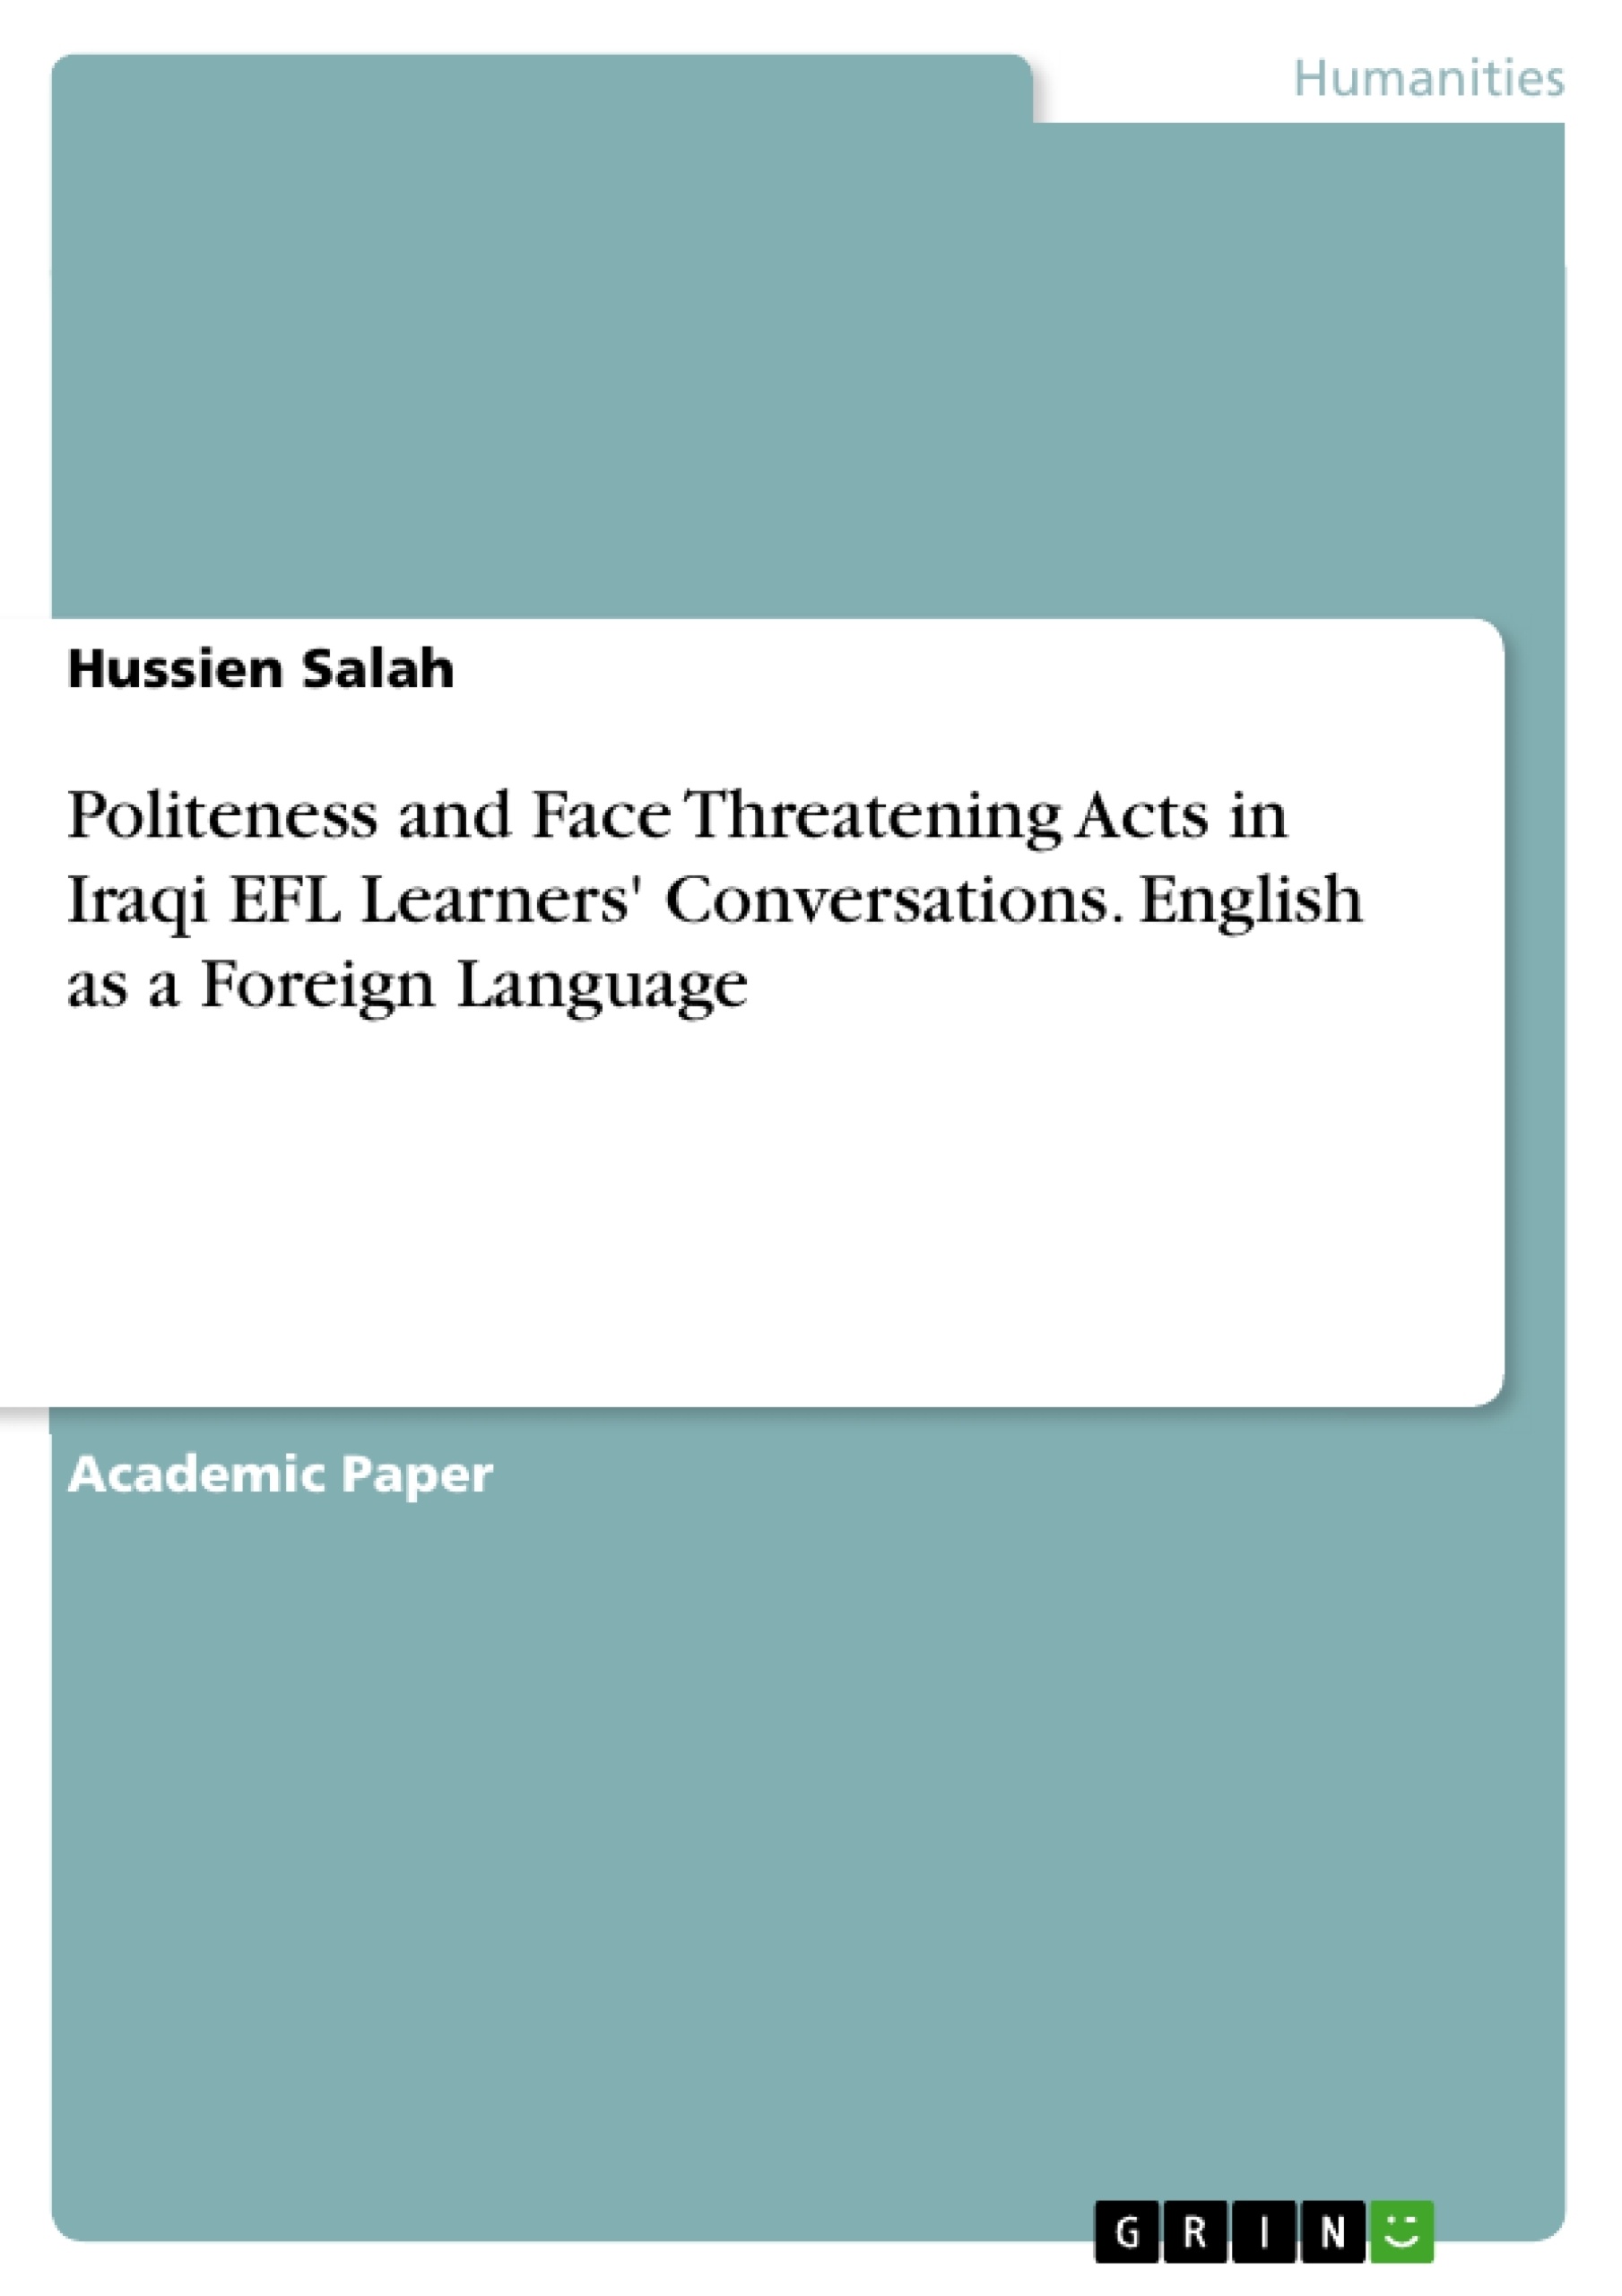 Title: Politeness and Face Threatening Acts in Iraqi EFL Learners' Conversations. English as a Foreign Language